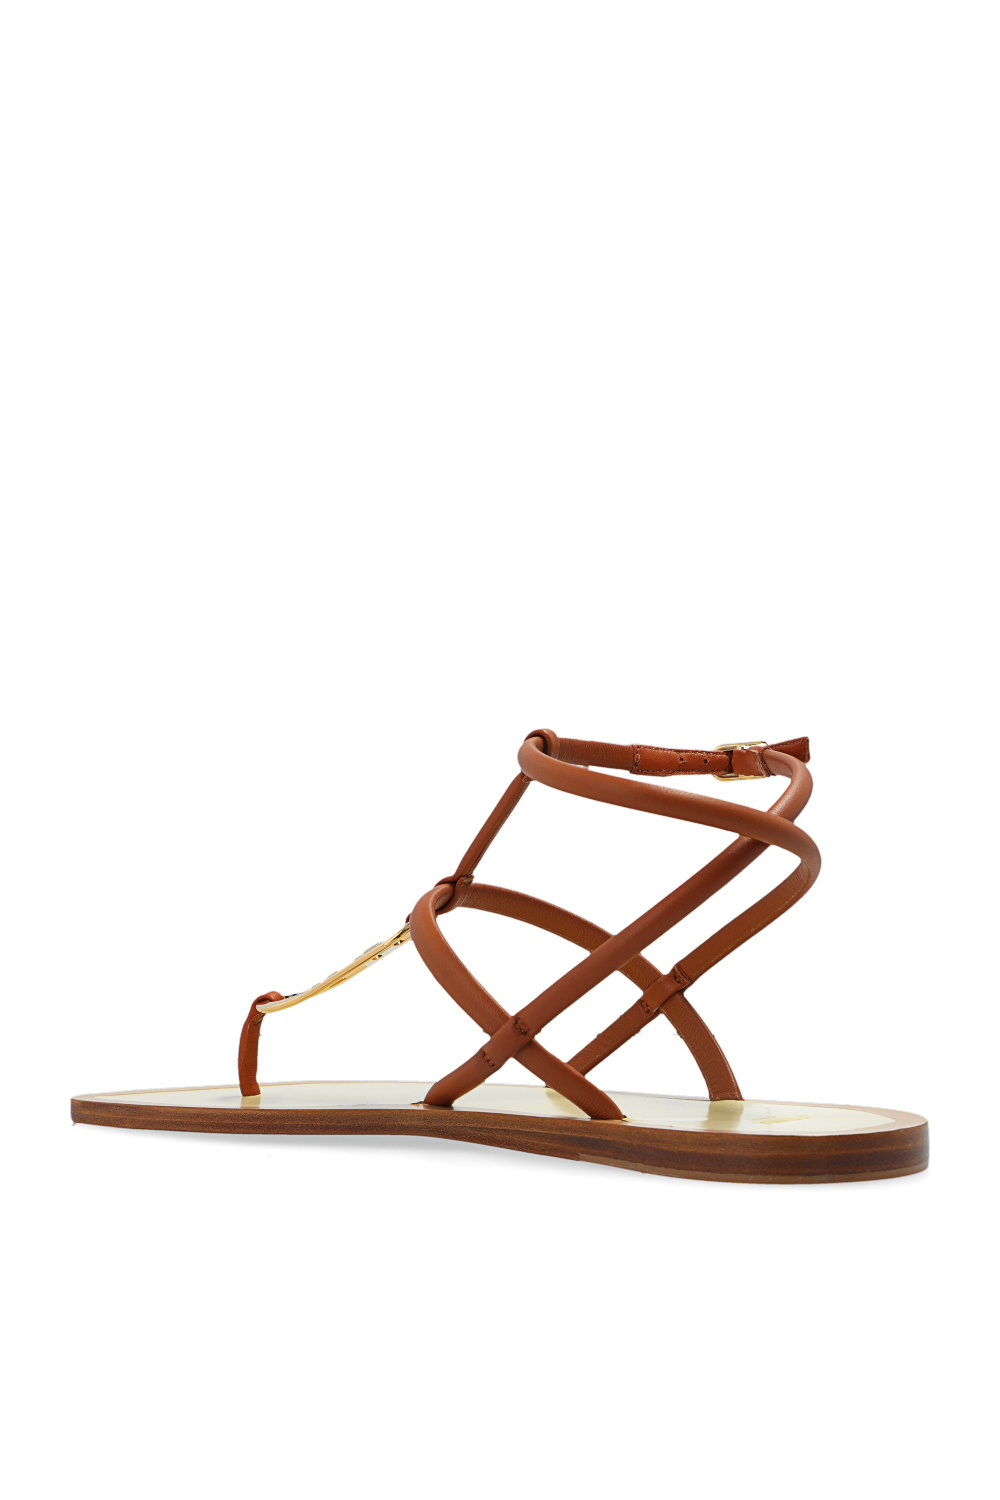 fendi kids Leather sandals with logo